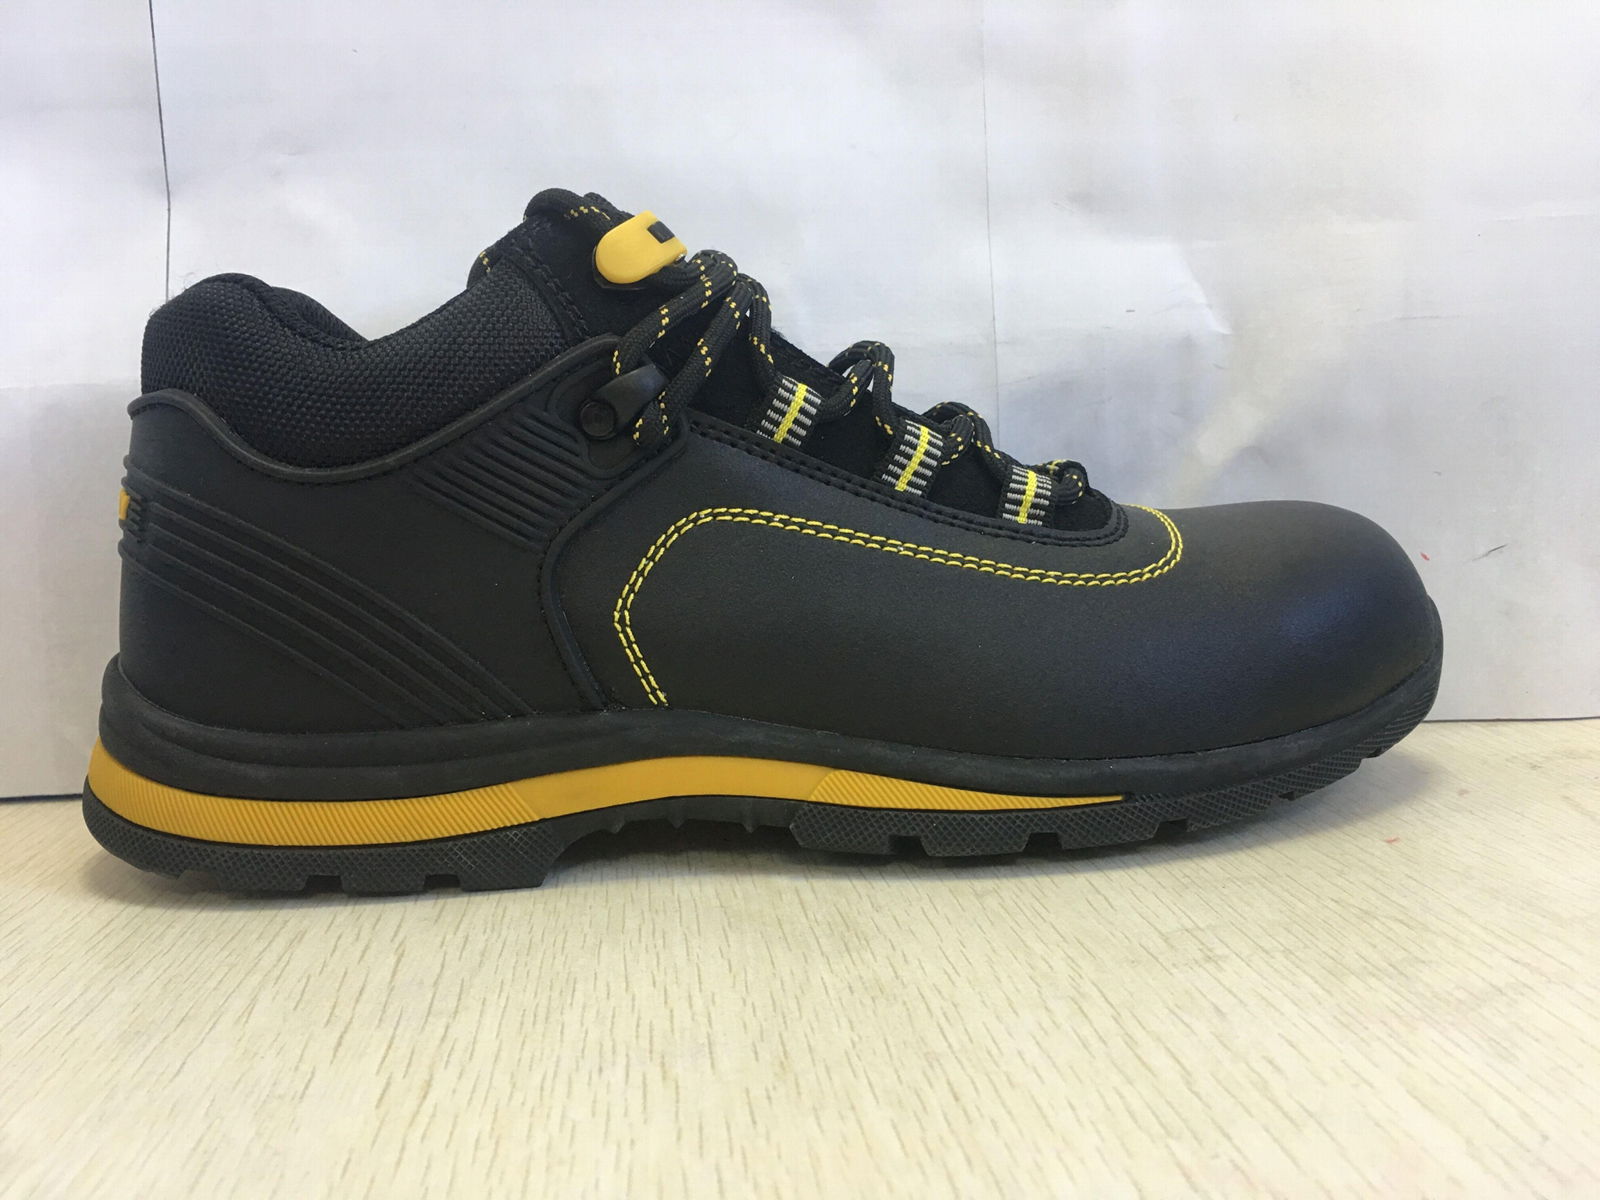 safety shoes - China - Manufacturer - Safety Work Shoes/Casual/fashion